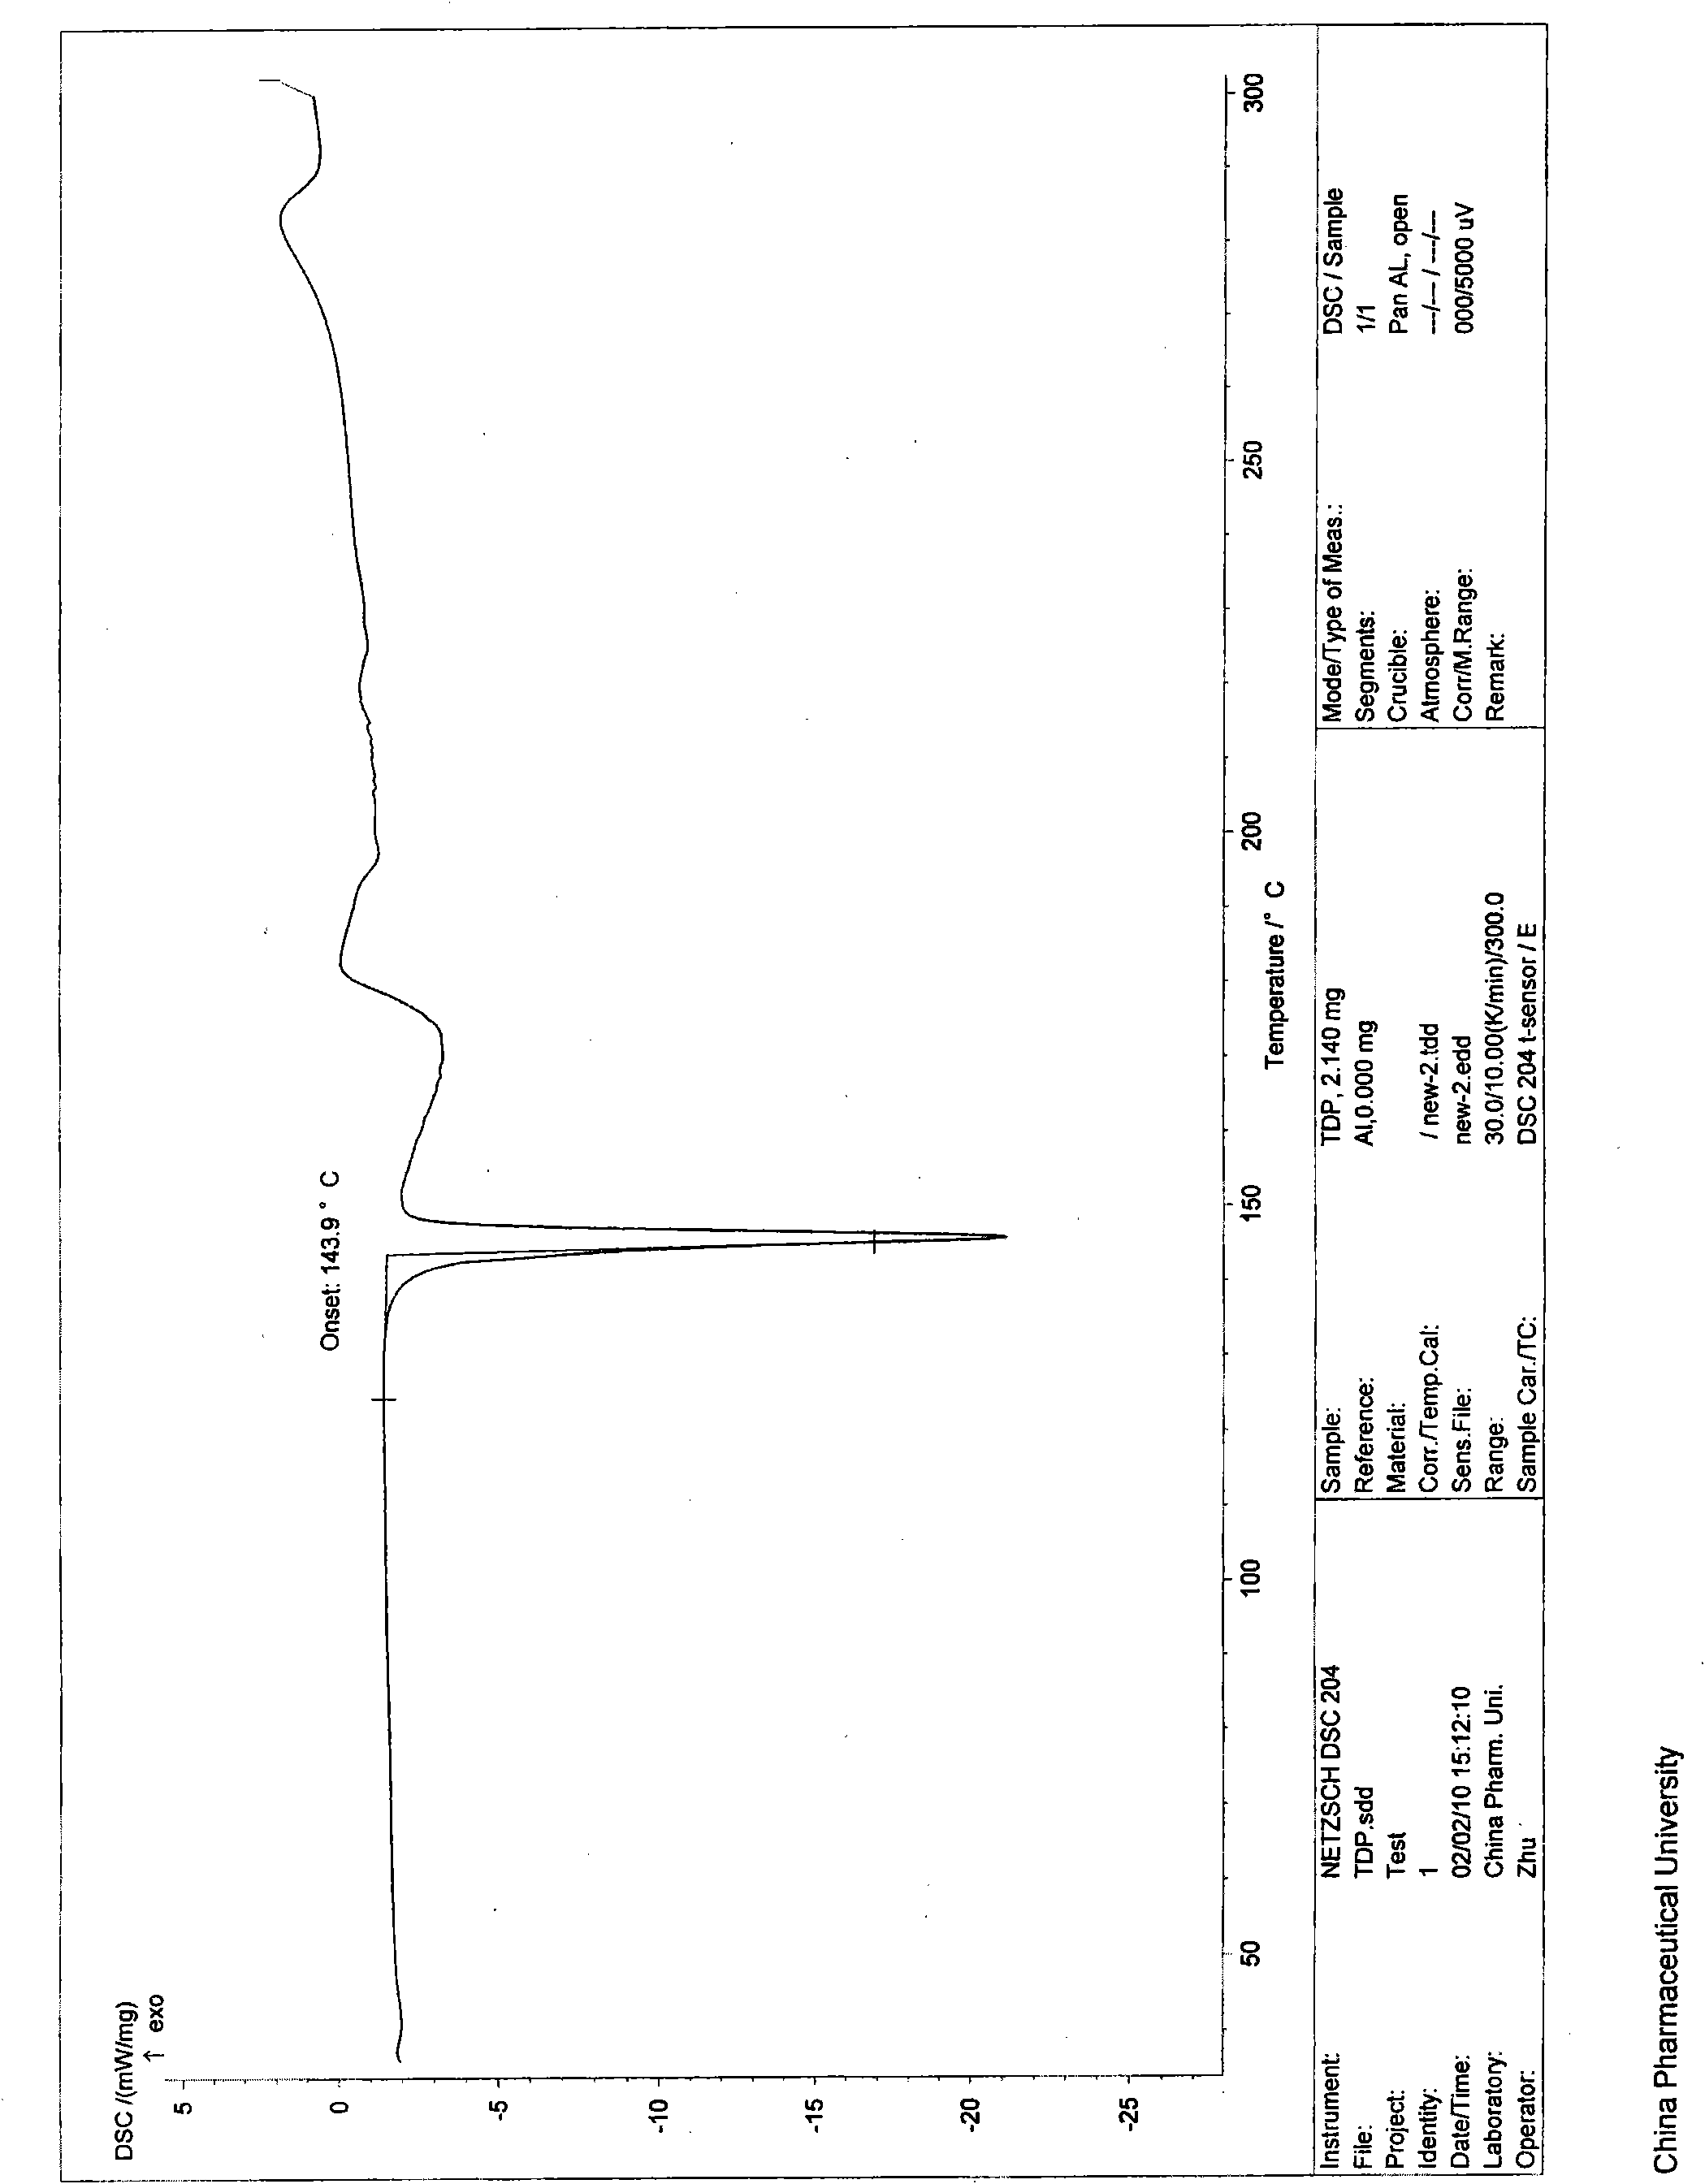 Salt compound of tenofovir disoproxil fumarate and preparation method and medicinal application thereof